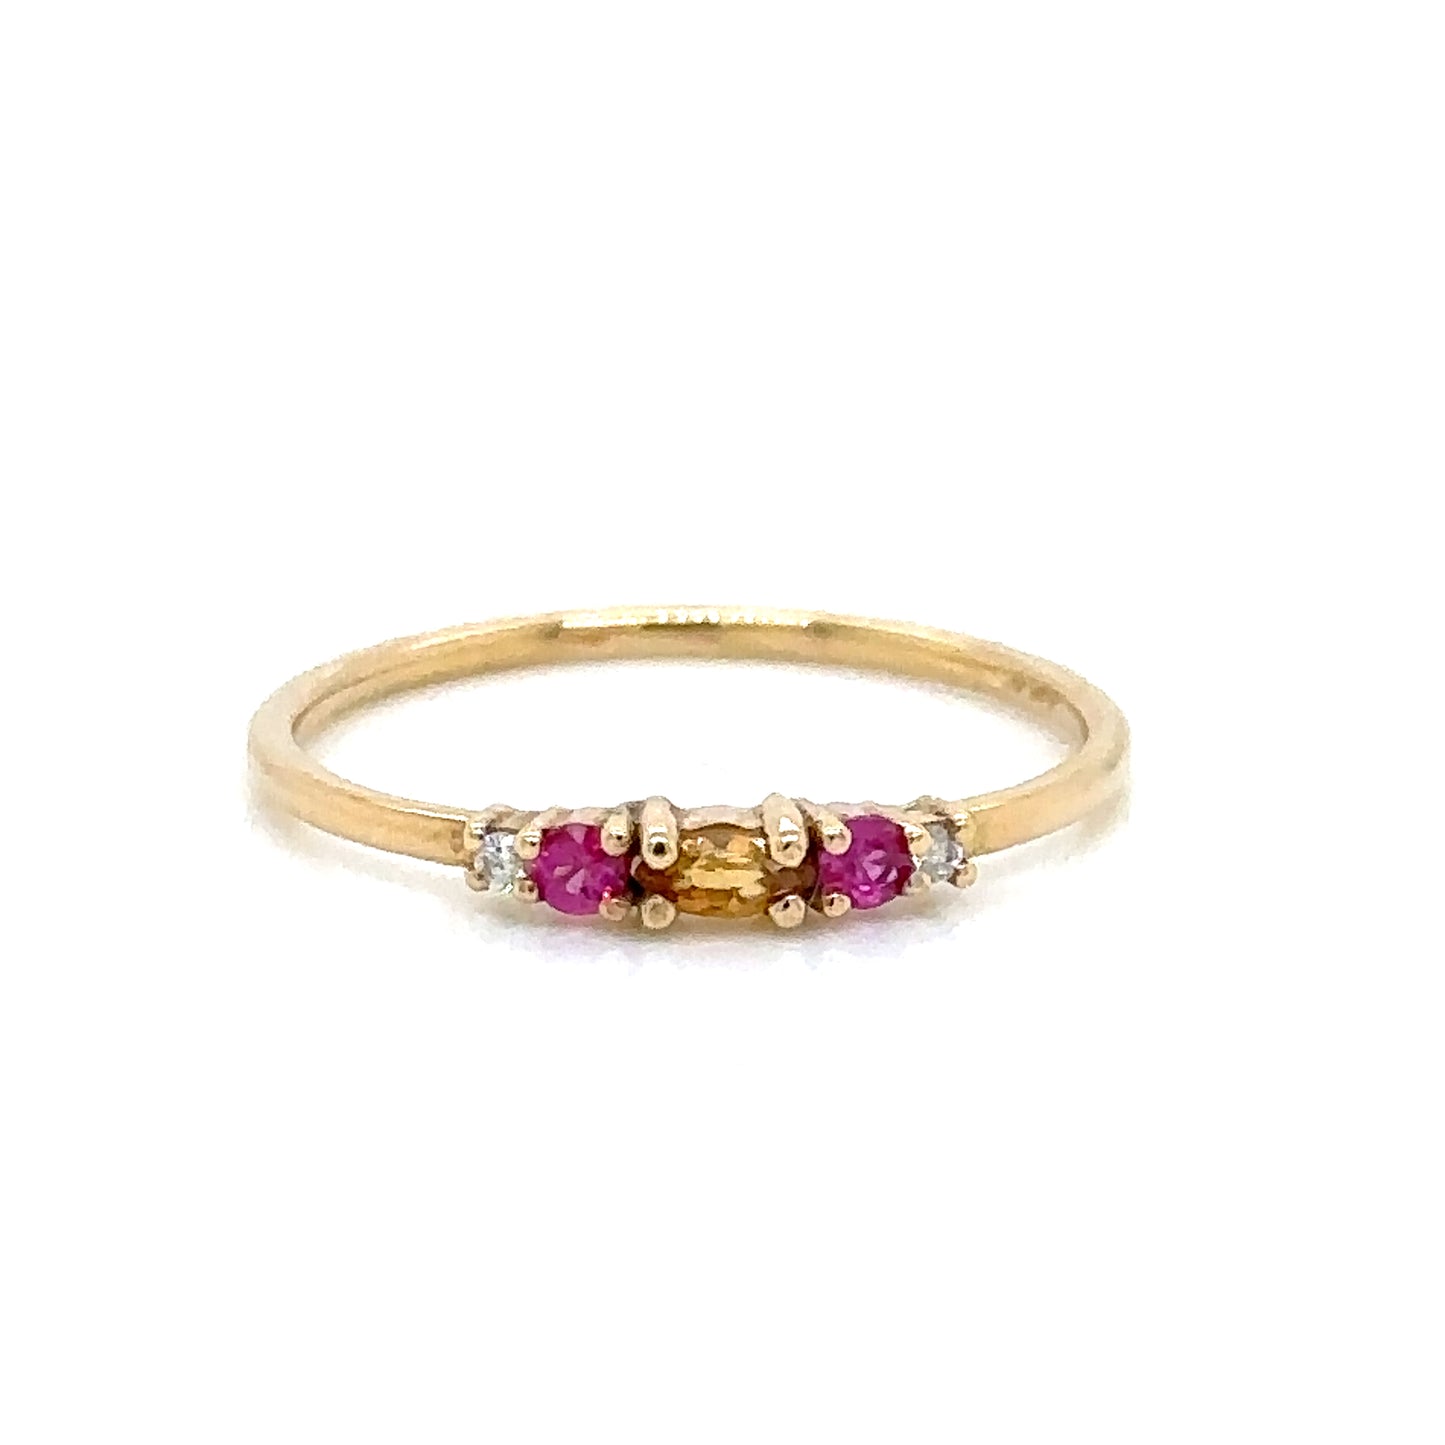 IMMEDIATE DELIVERY / Citrine ring with pink sapphire and diamonds / 14k yellow gold / Size 8